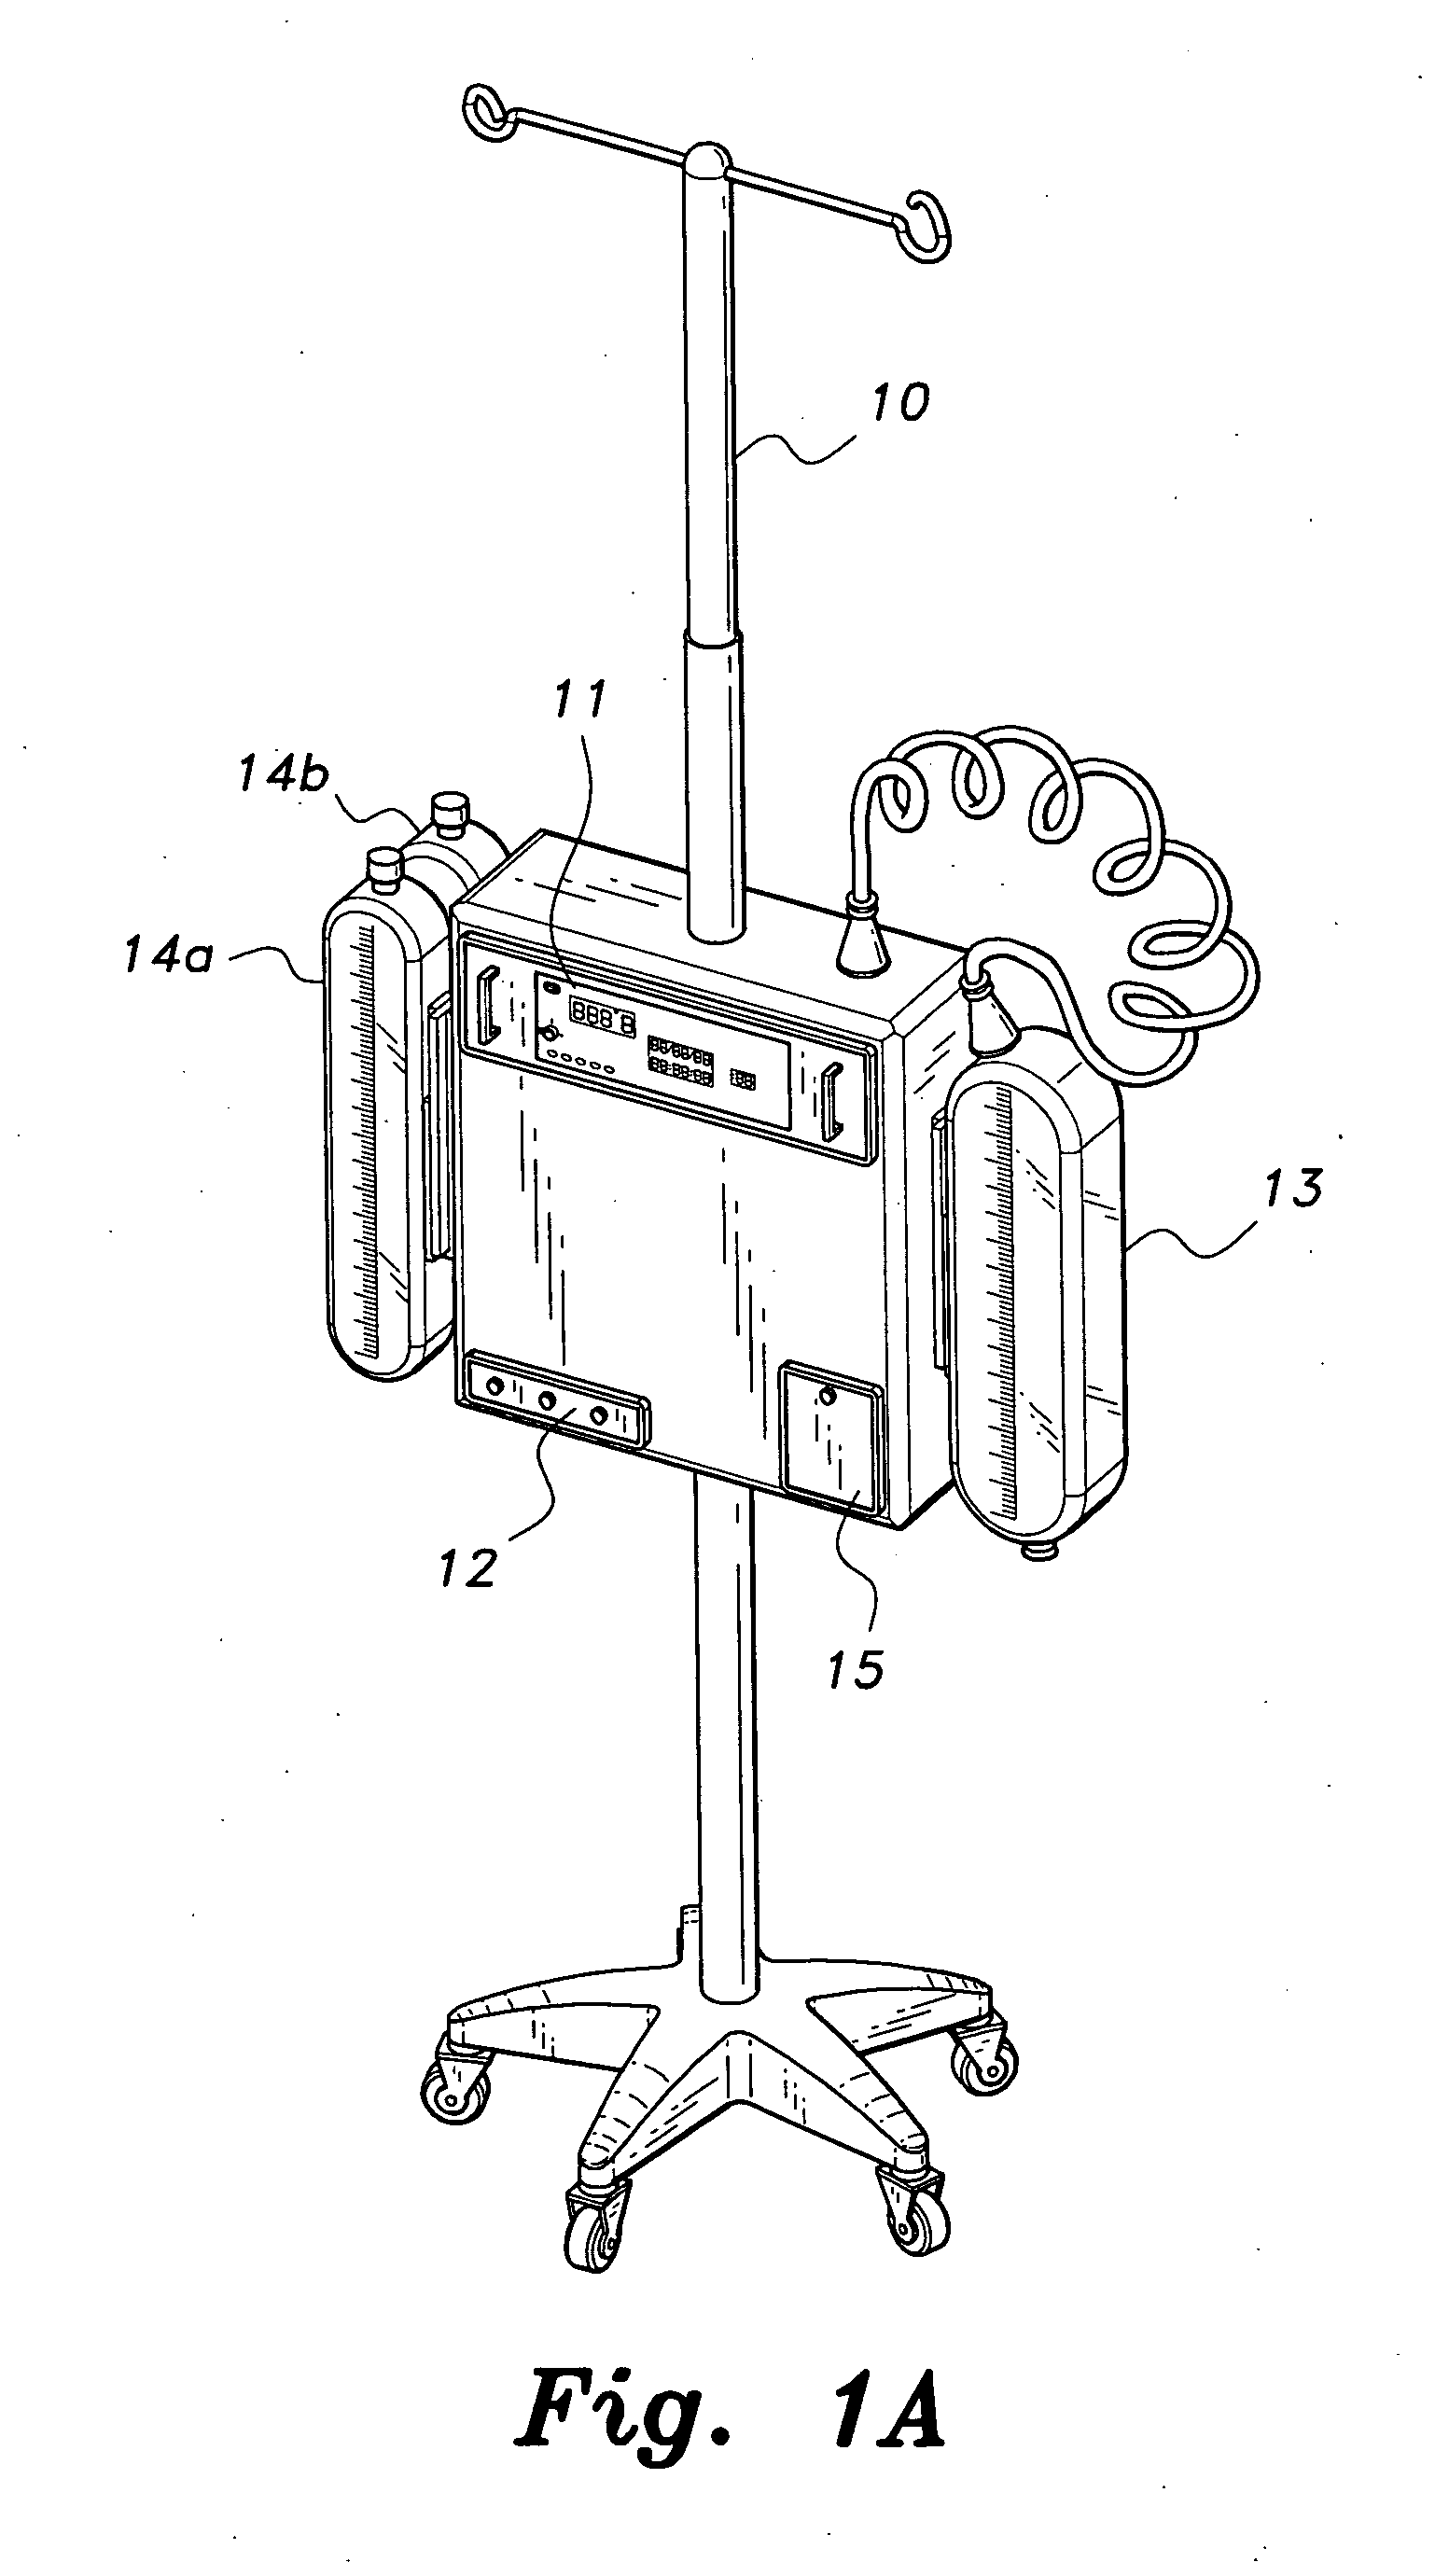 Automatic pubic area cleaning system